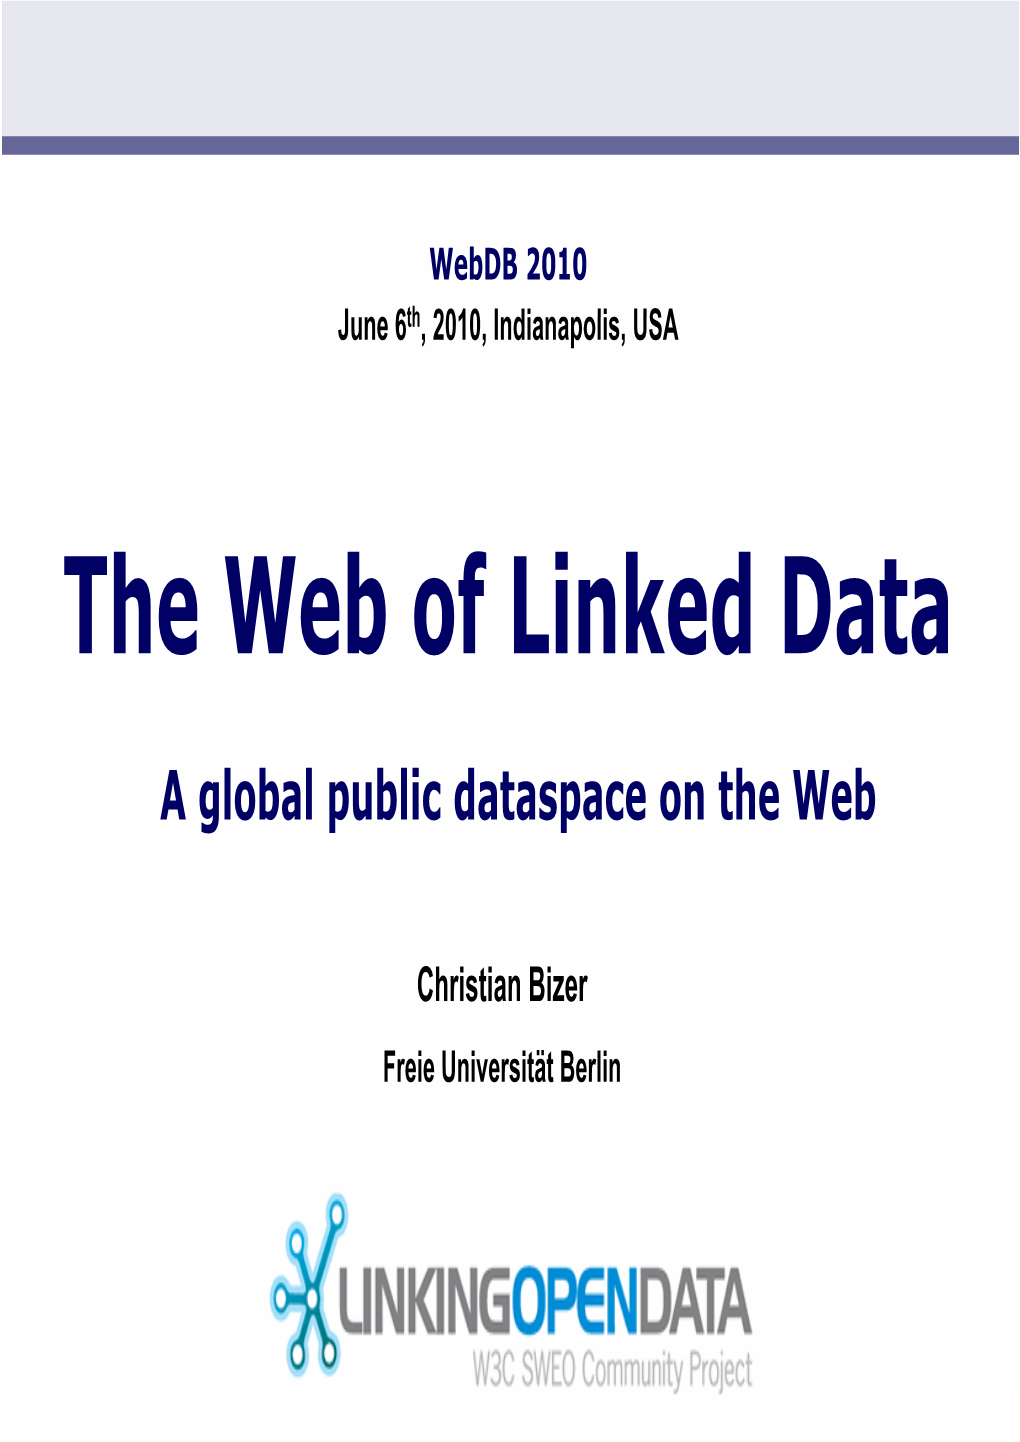 The Web of Linked Data